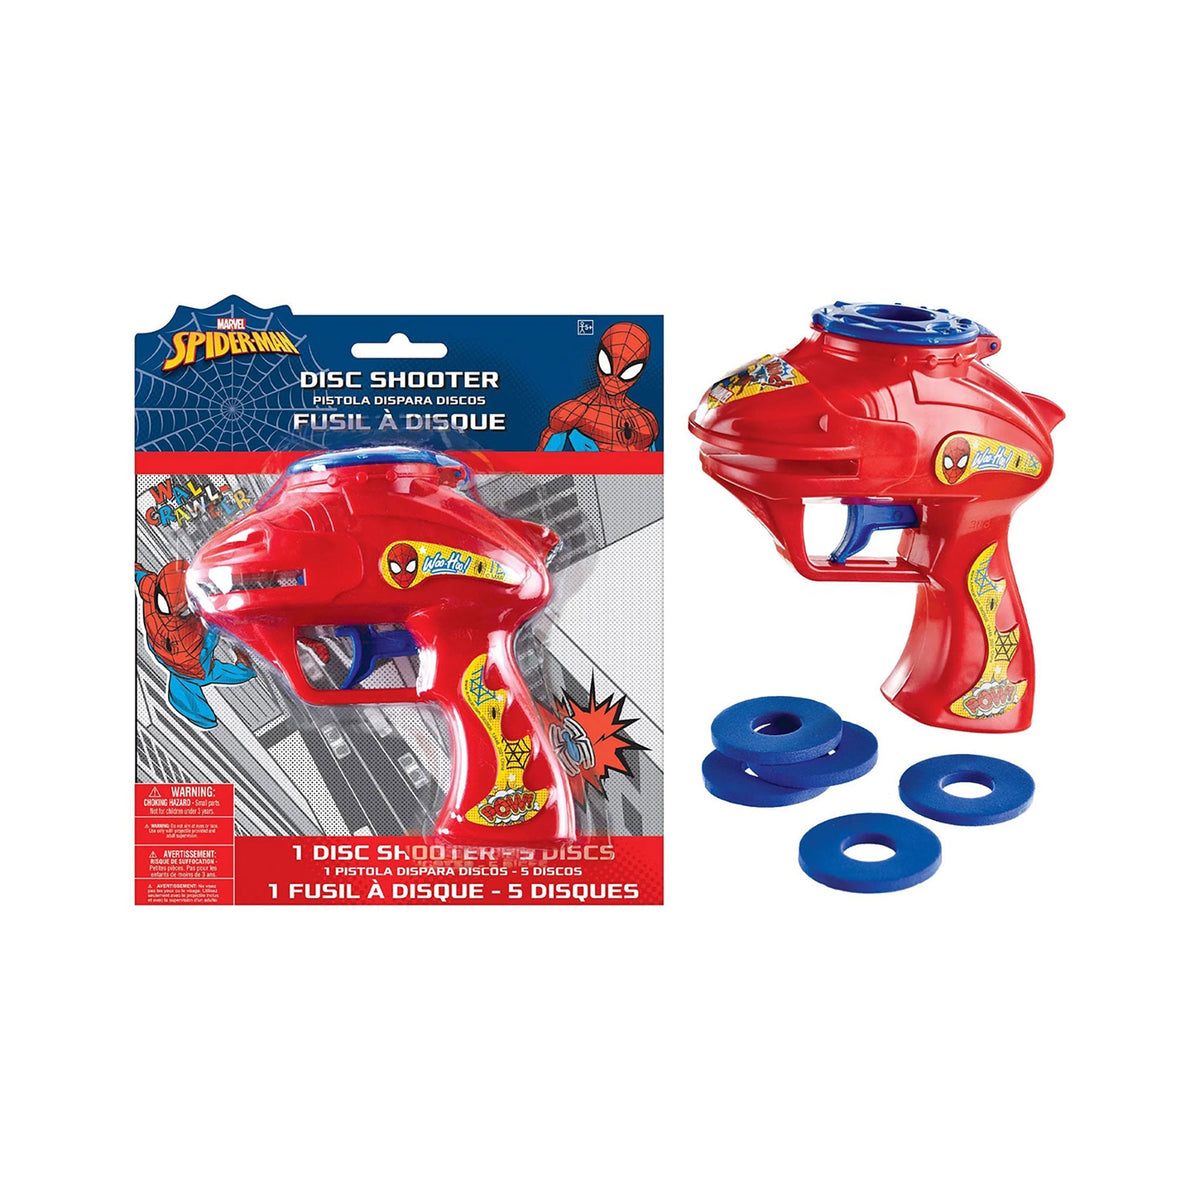 AMSCAN CA Impulse Buying Marvel Spider-man Disc Shooter with 5 Discs, 1 Count